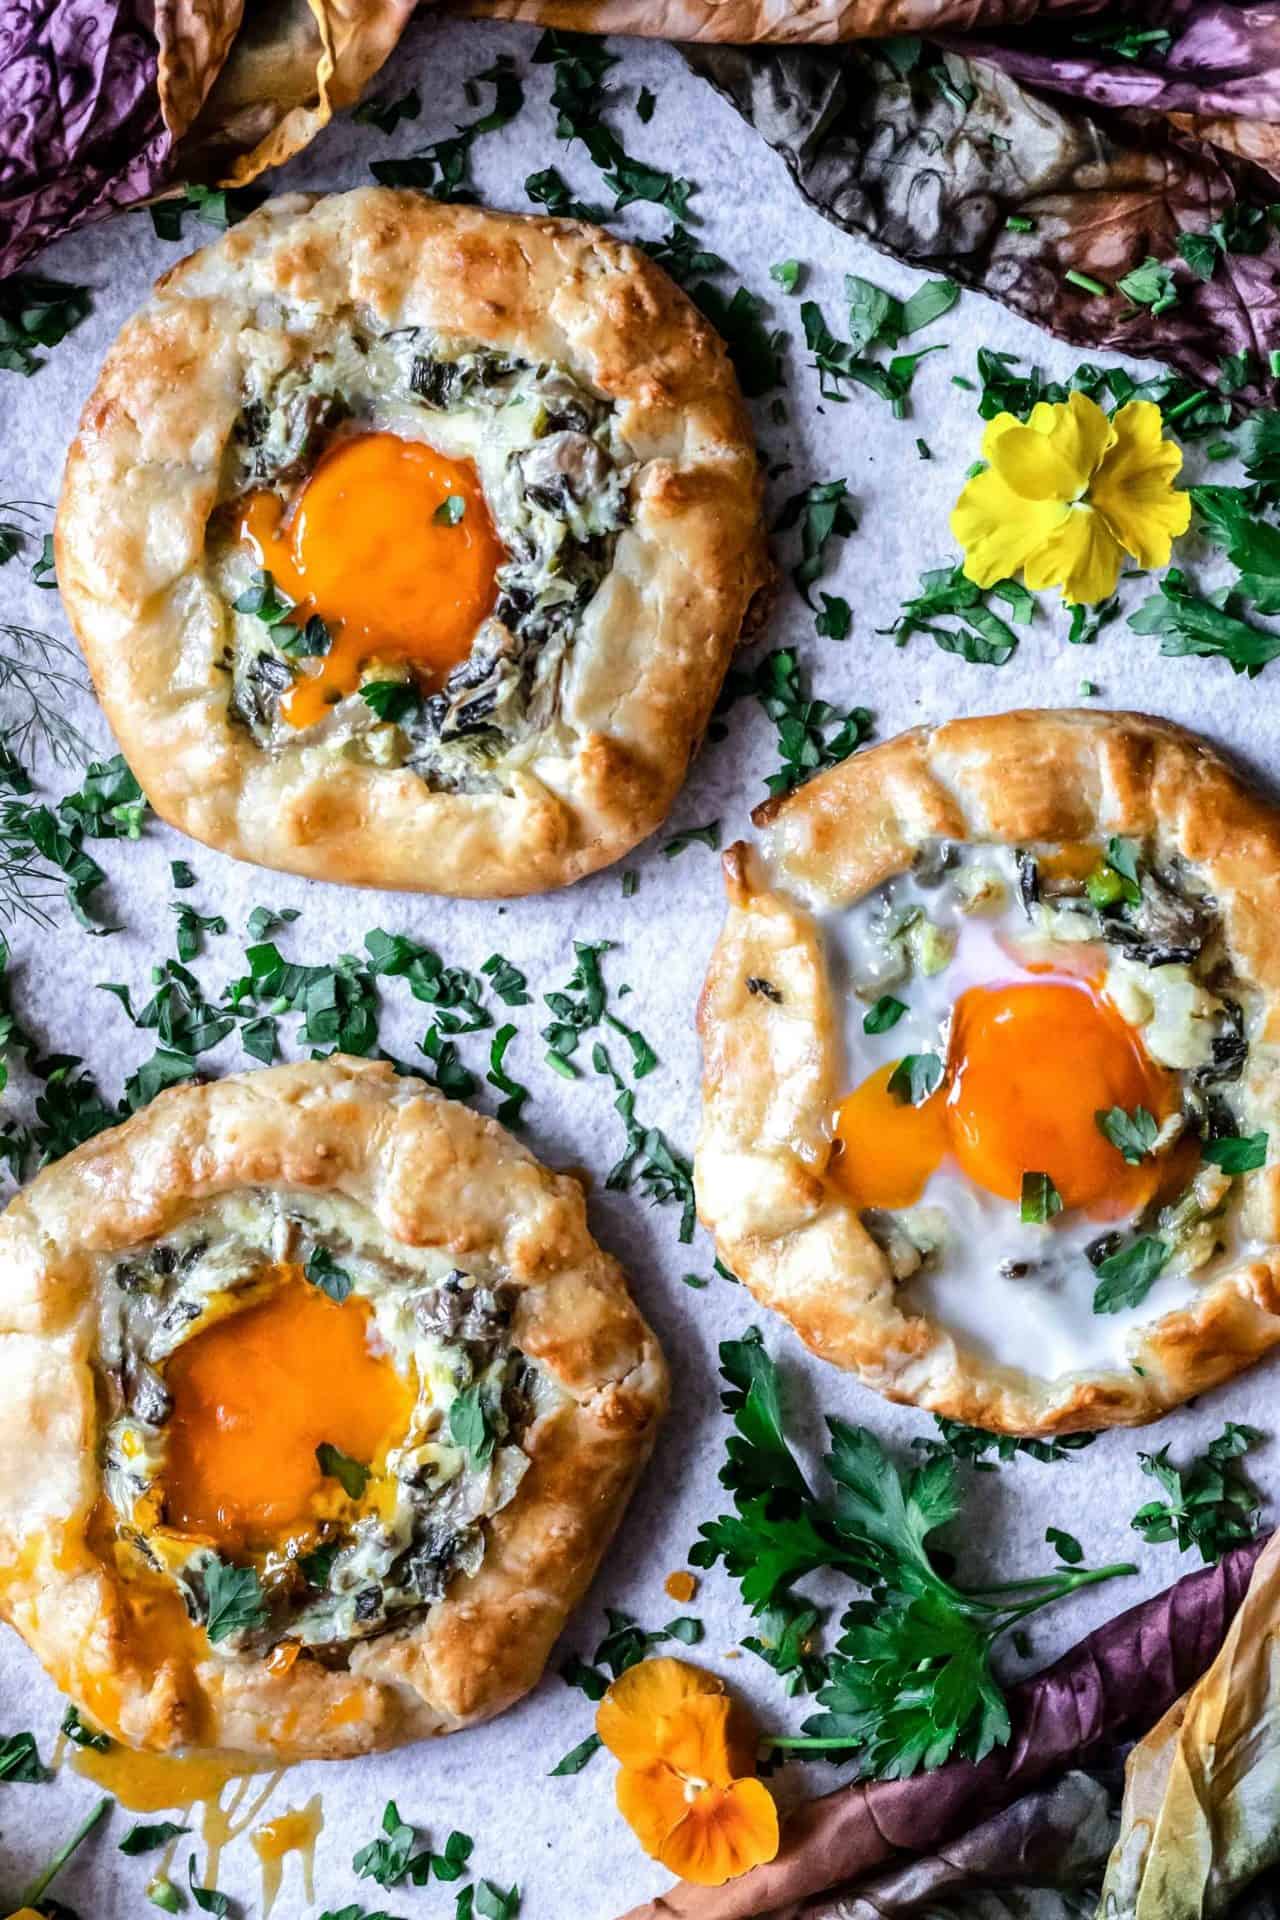 This Mushroom and Egg Galette is low FODMAP and Gluten-Free! Plus it is very simple to make, savory, cheesy and so delicious!